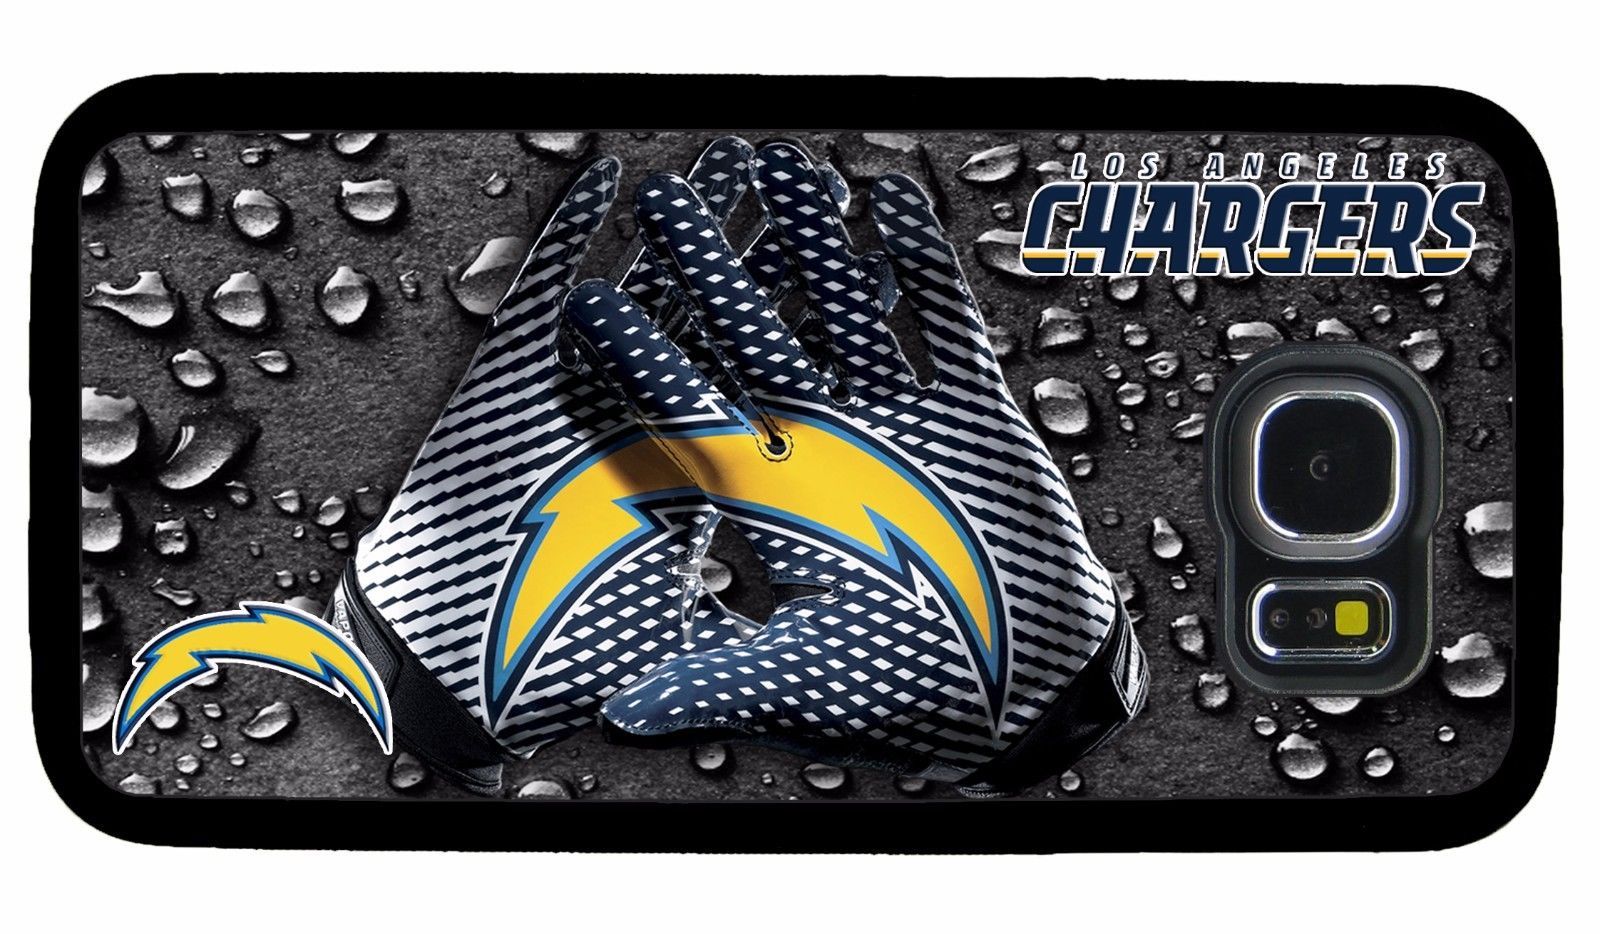 LOS ANGELES CHARGERS PHONE CASE COVER FOR SAMSUNG GALAXY S4 S5 S6 S7 EDGE S8 S9 - $11.99